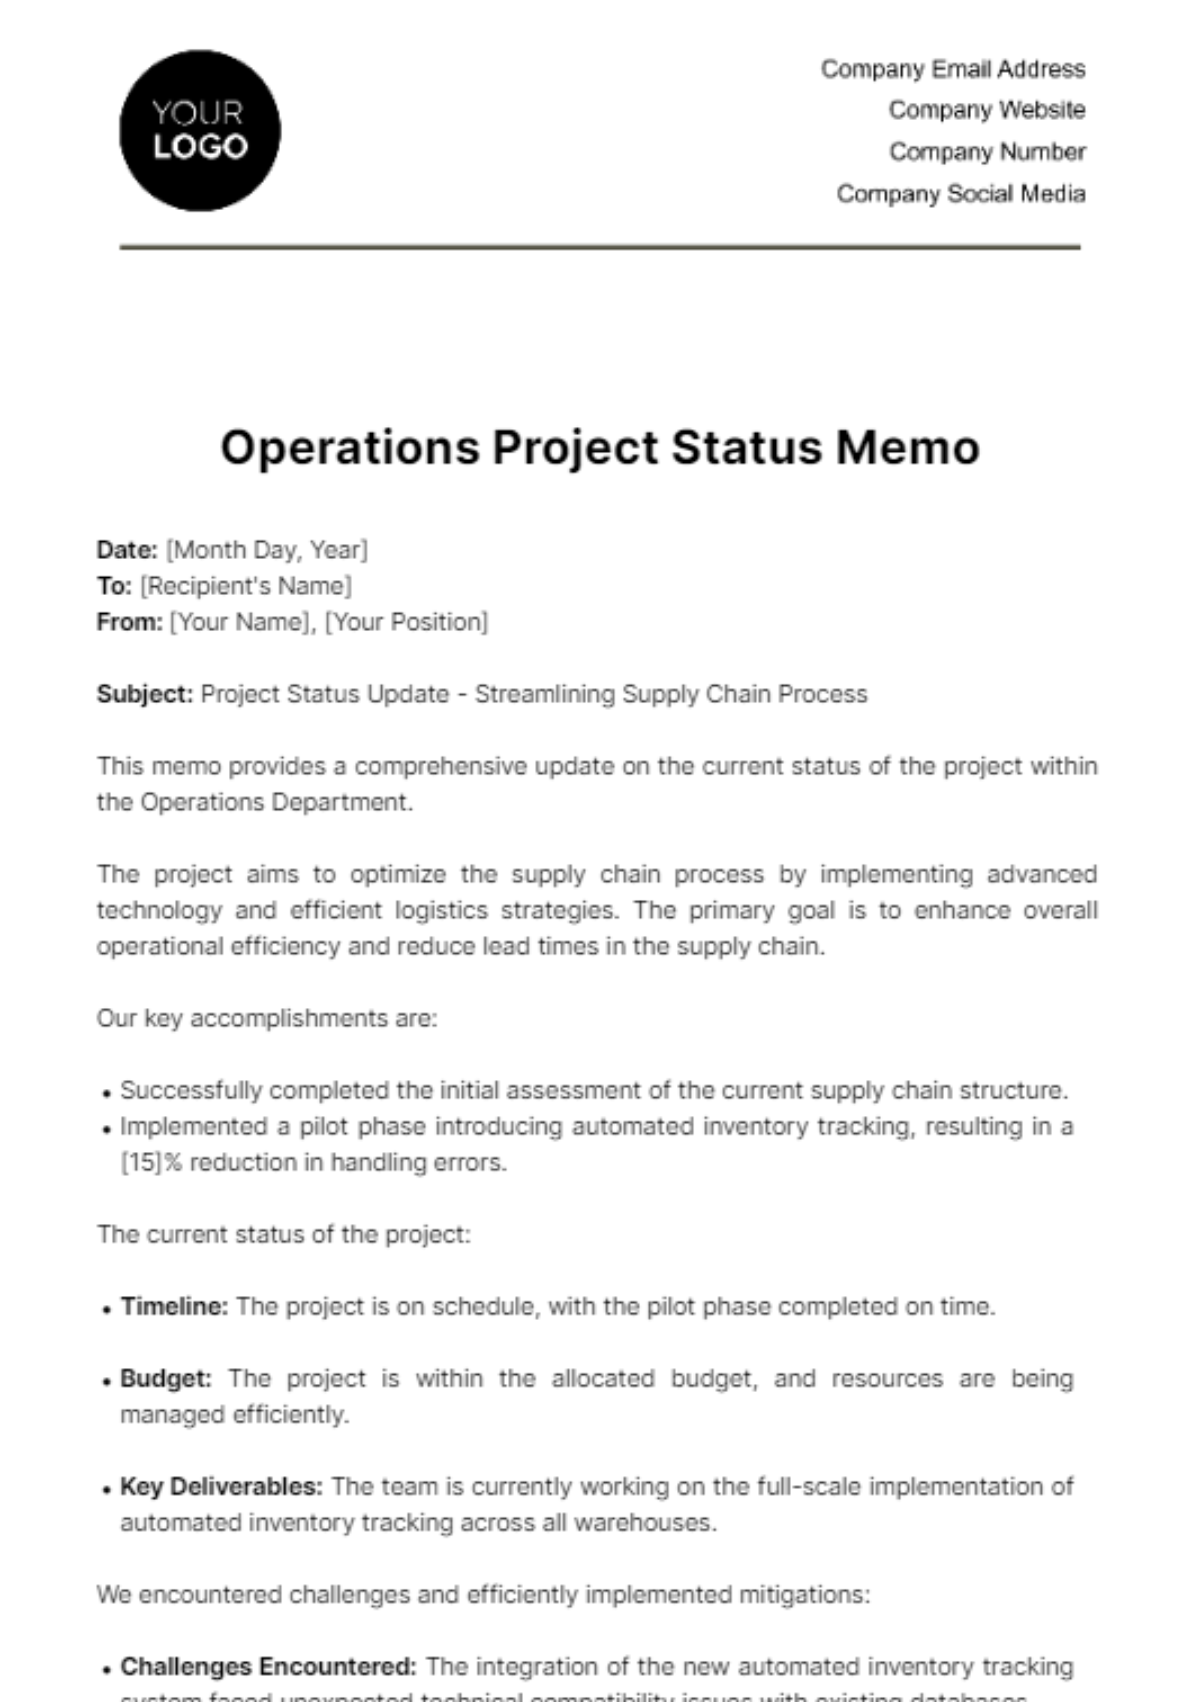 Operations Project Status Memo Template